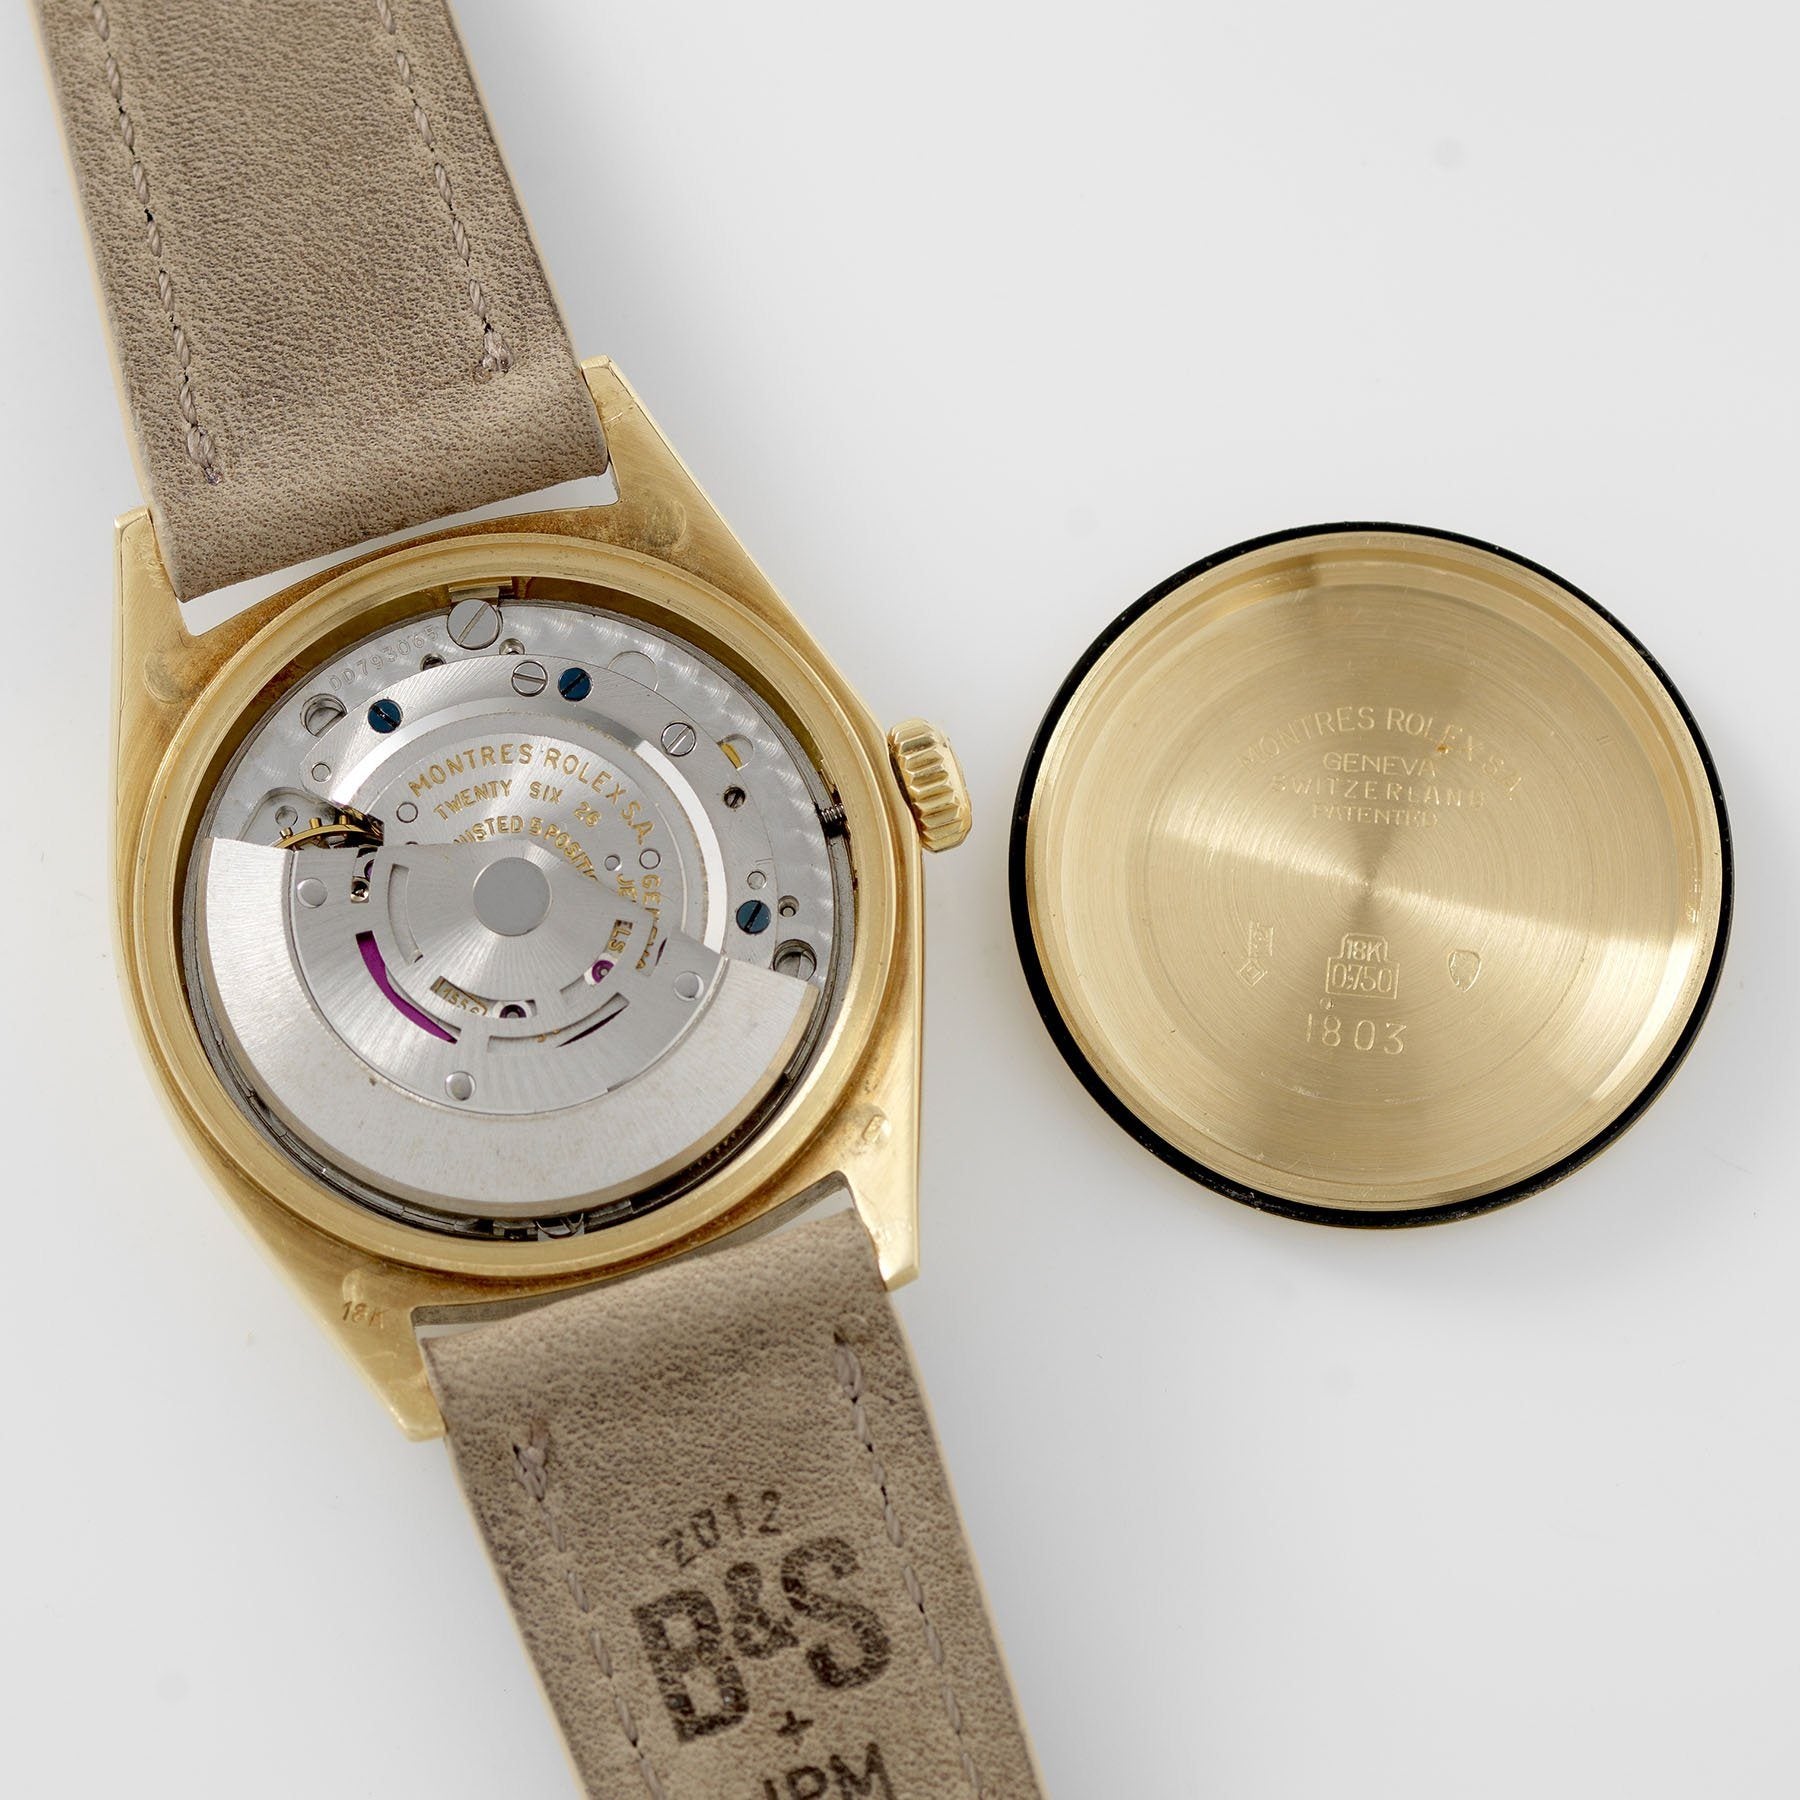 Rolex Day-Date Yellow Gold Wide Boy Dial 1802 movement